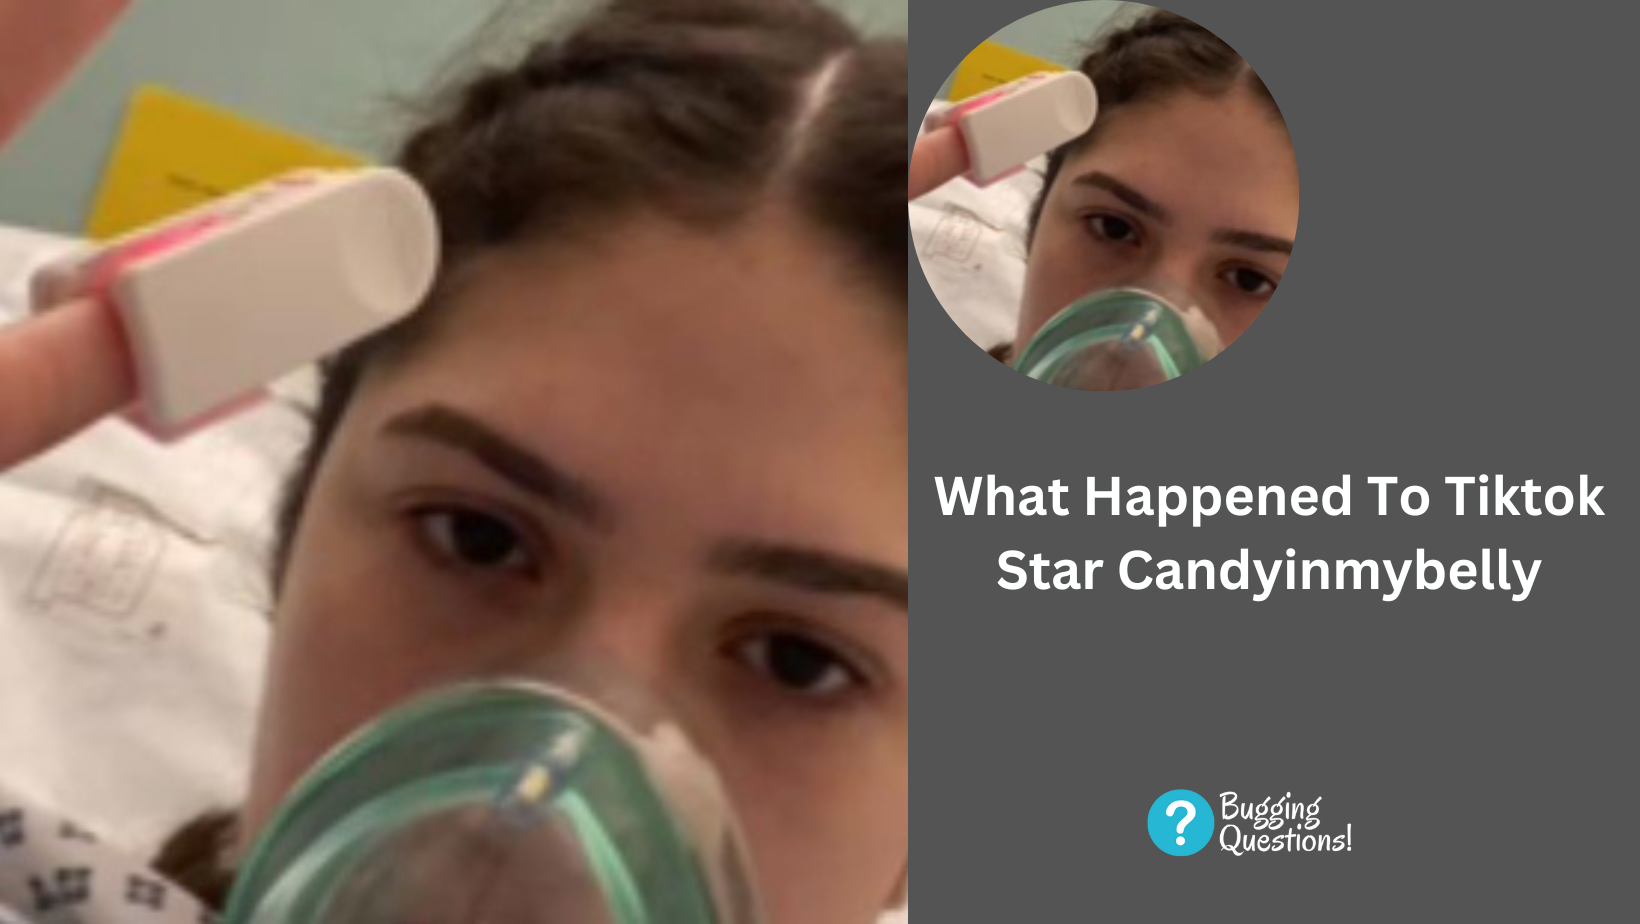 What Happened To Tiktok Star Candyinmybelly